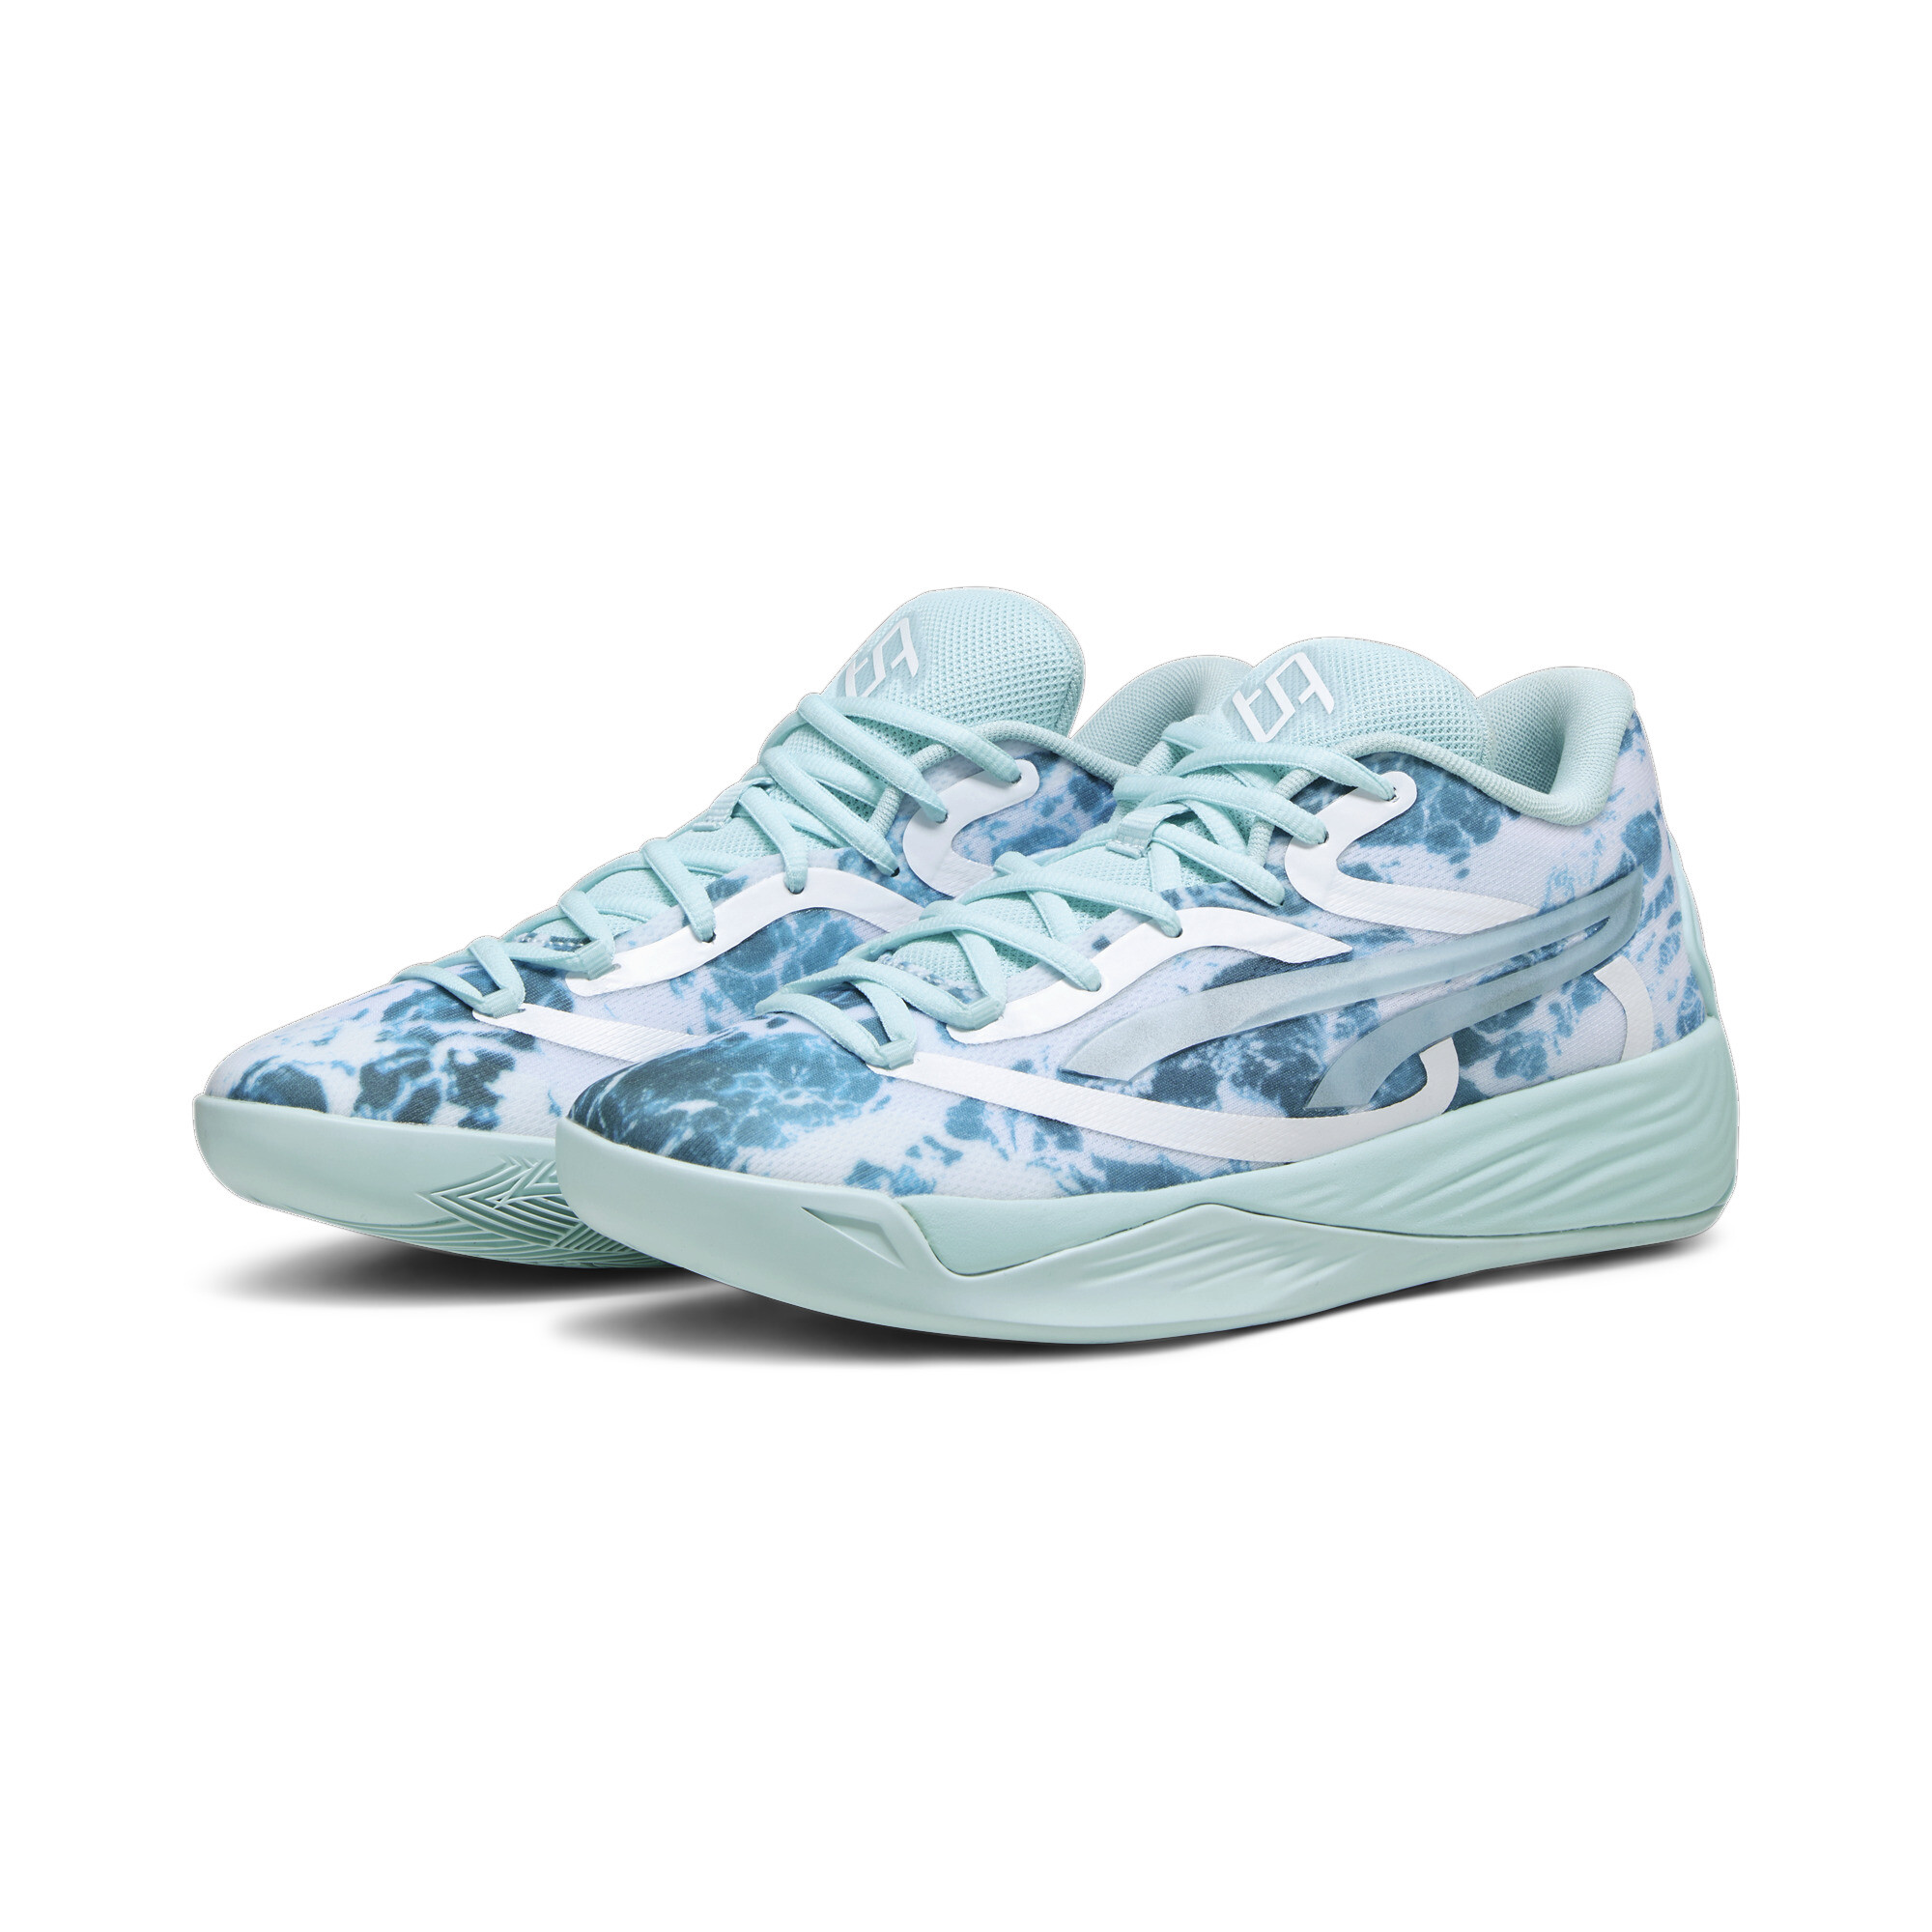 Women's Puma Stewie 2 Water's Basketball Shoes, Blue, Size 37, Shoes